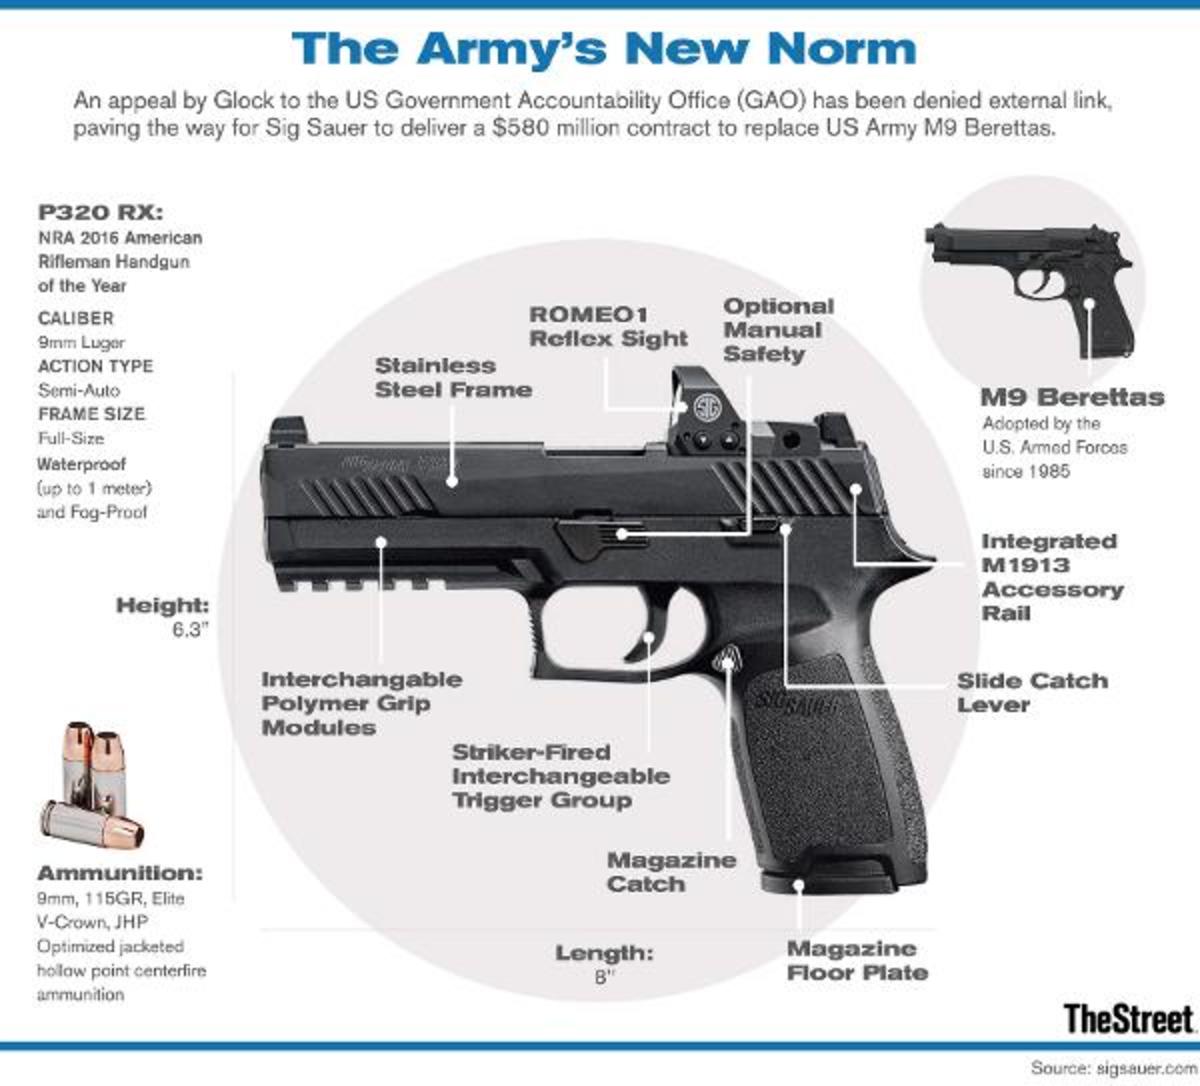 This Is the New Army Standard Issue Pistol, Just So You Know - TheStreet